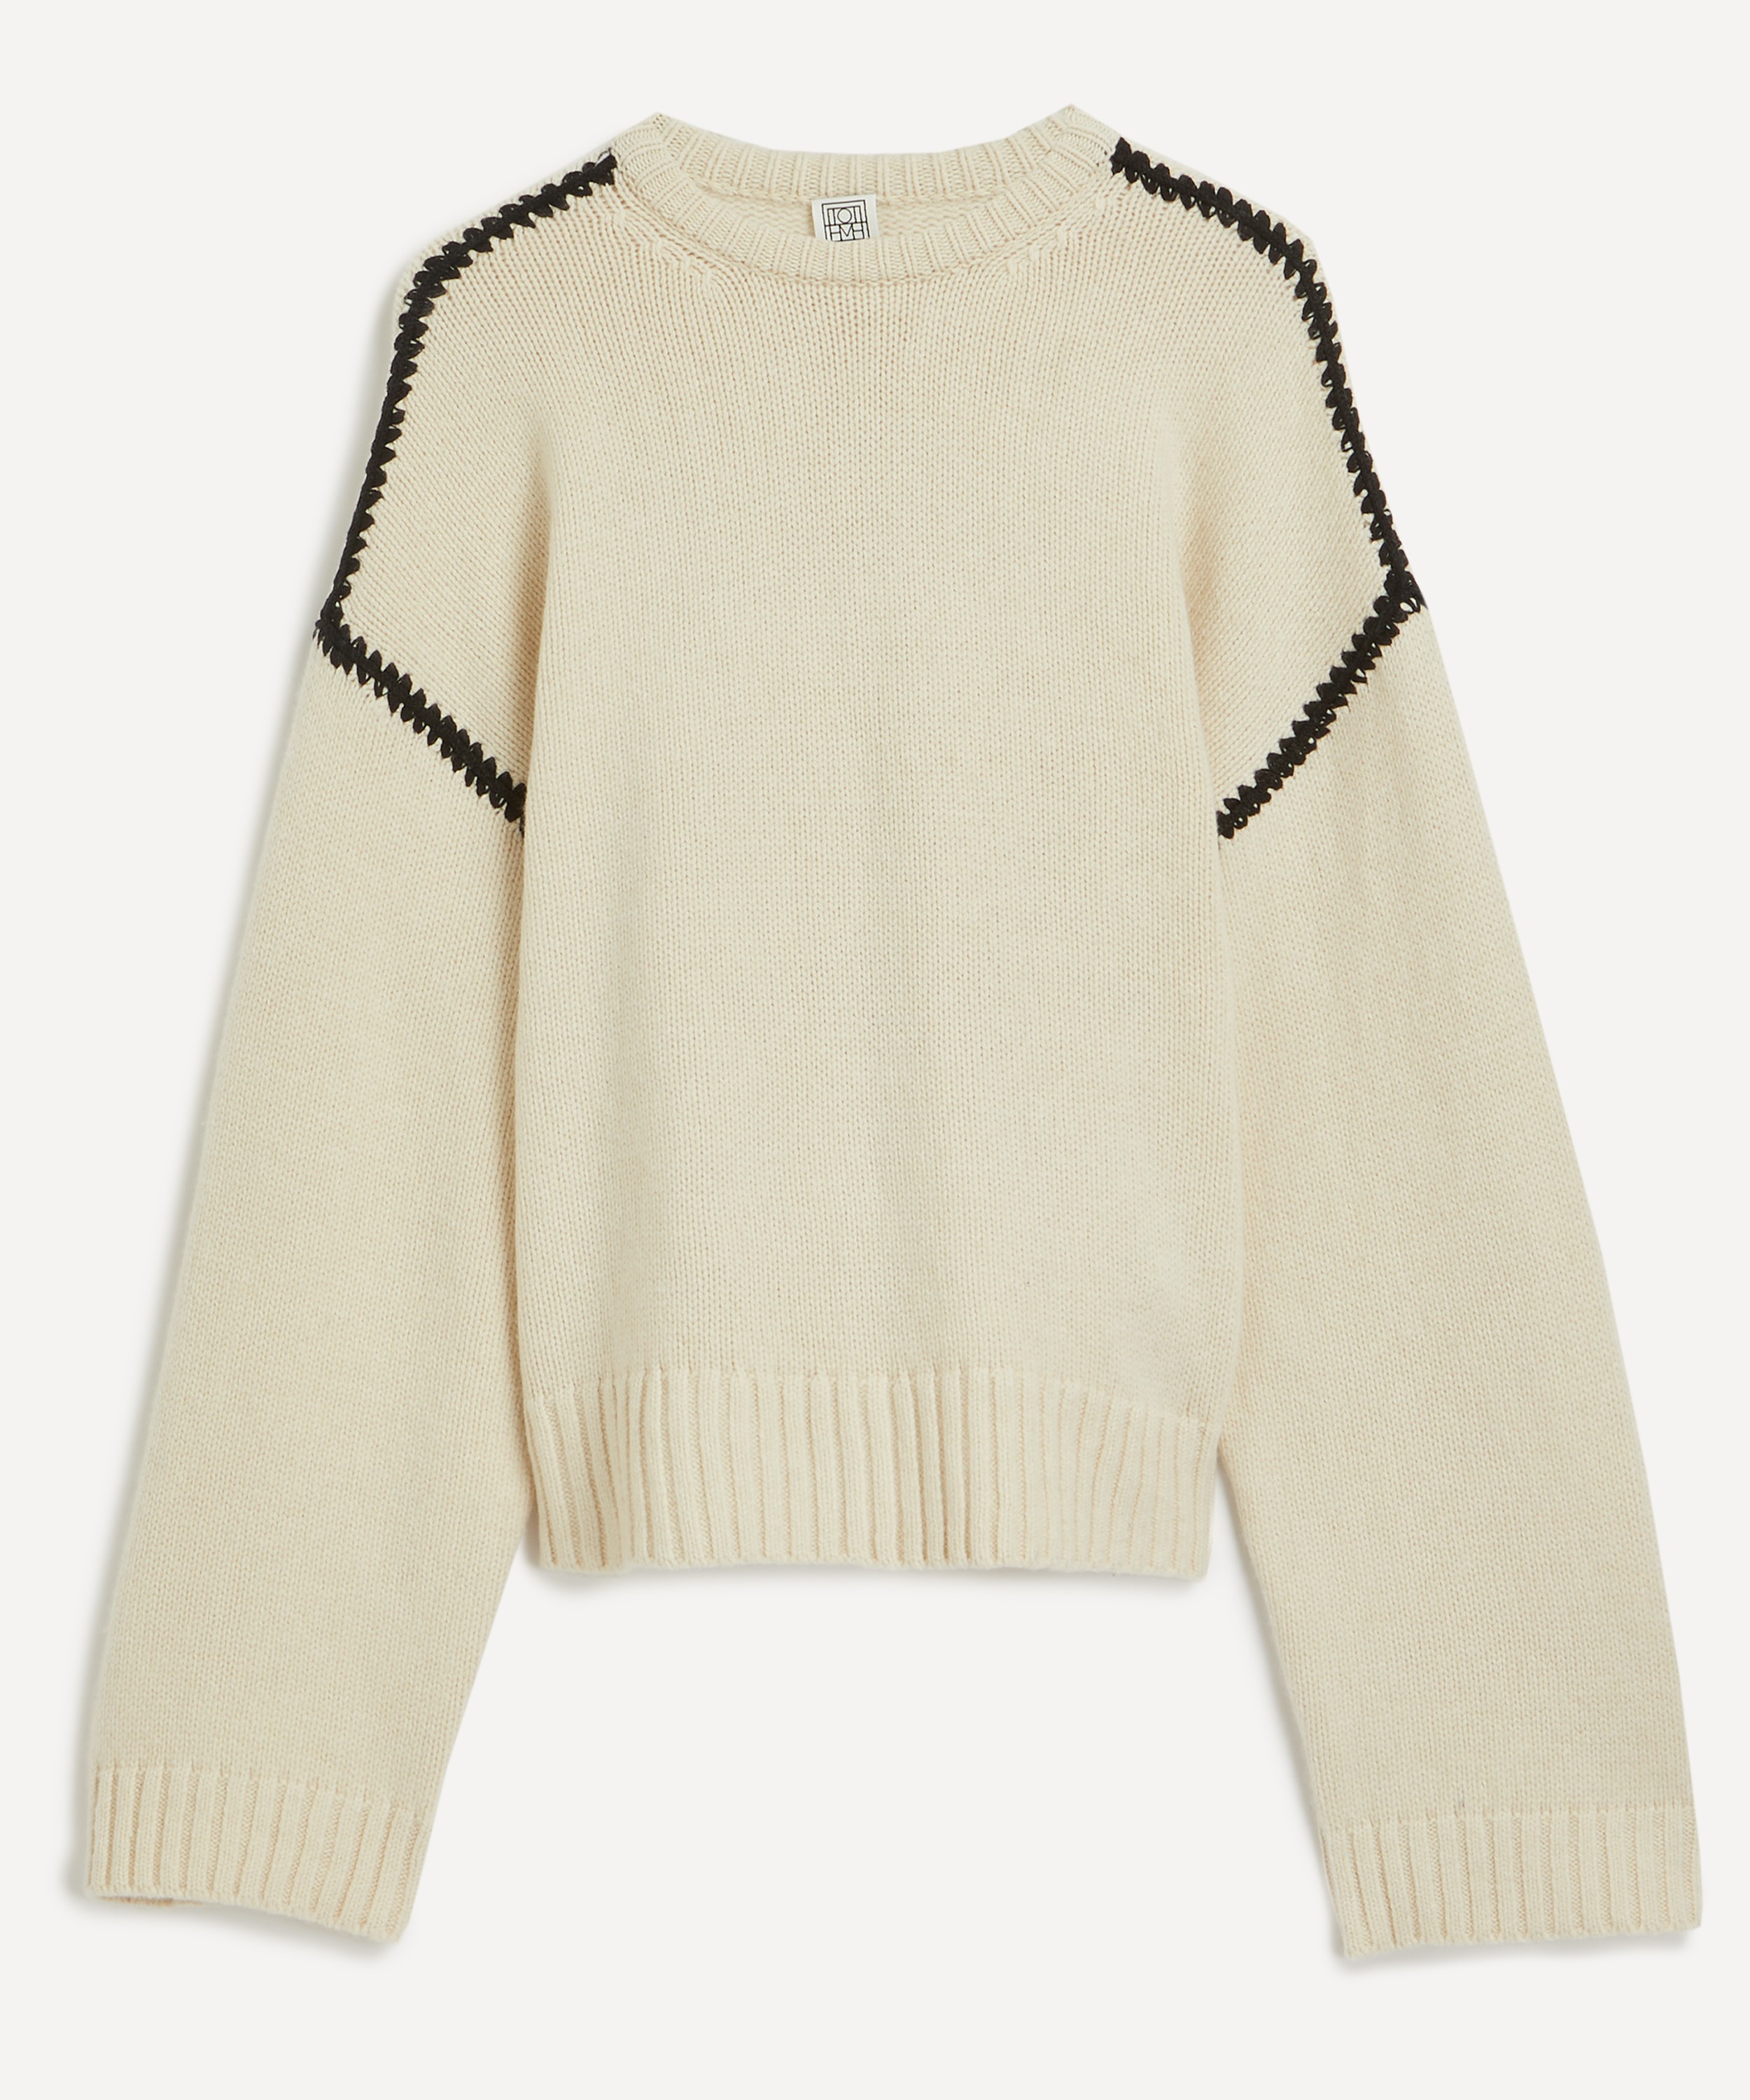 Toteme - Embroidered Cashmere Knit Jumper